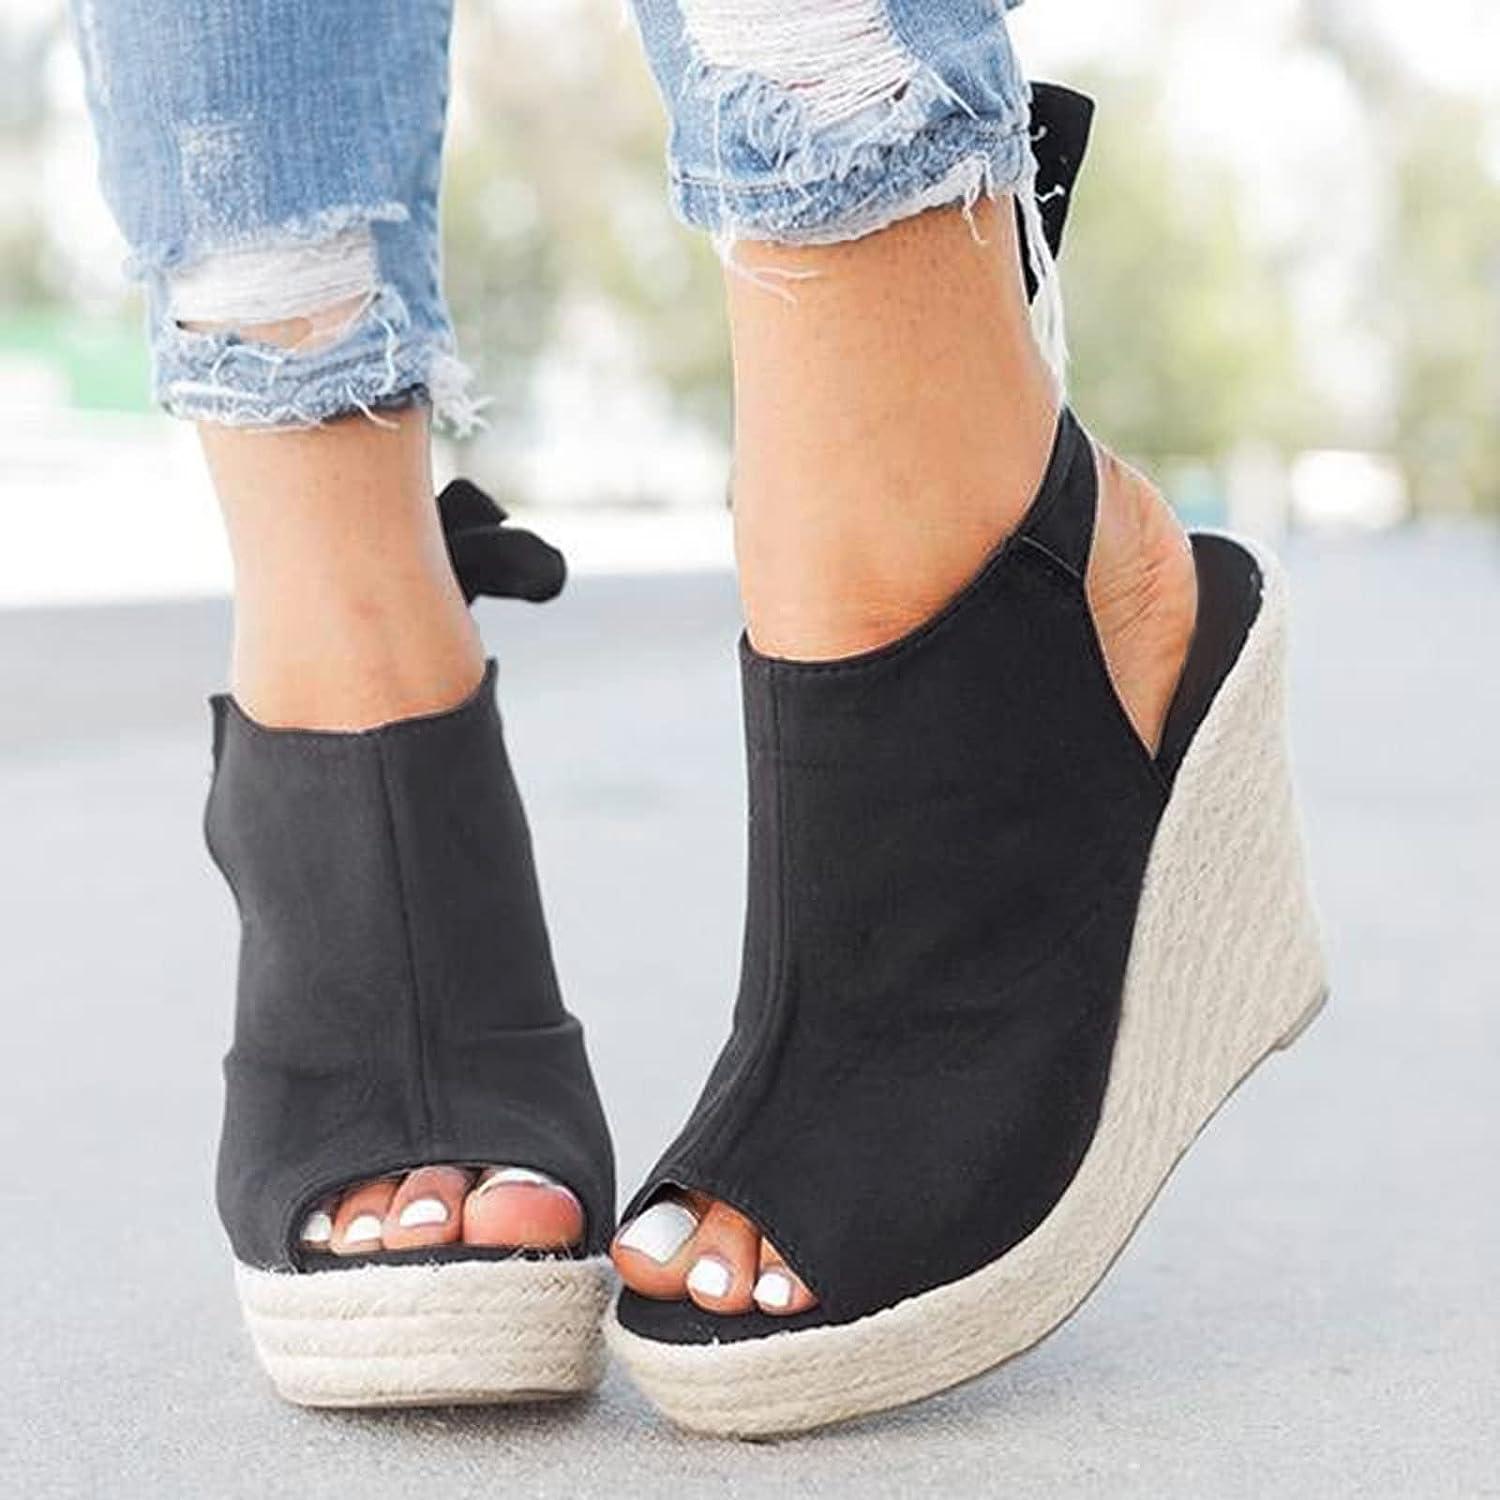 Women's Black Madelyn Strappy Braided Suede Wedge Sandal | TOMS